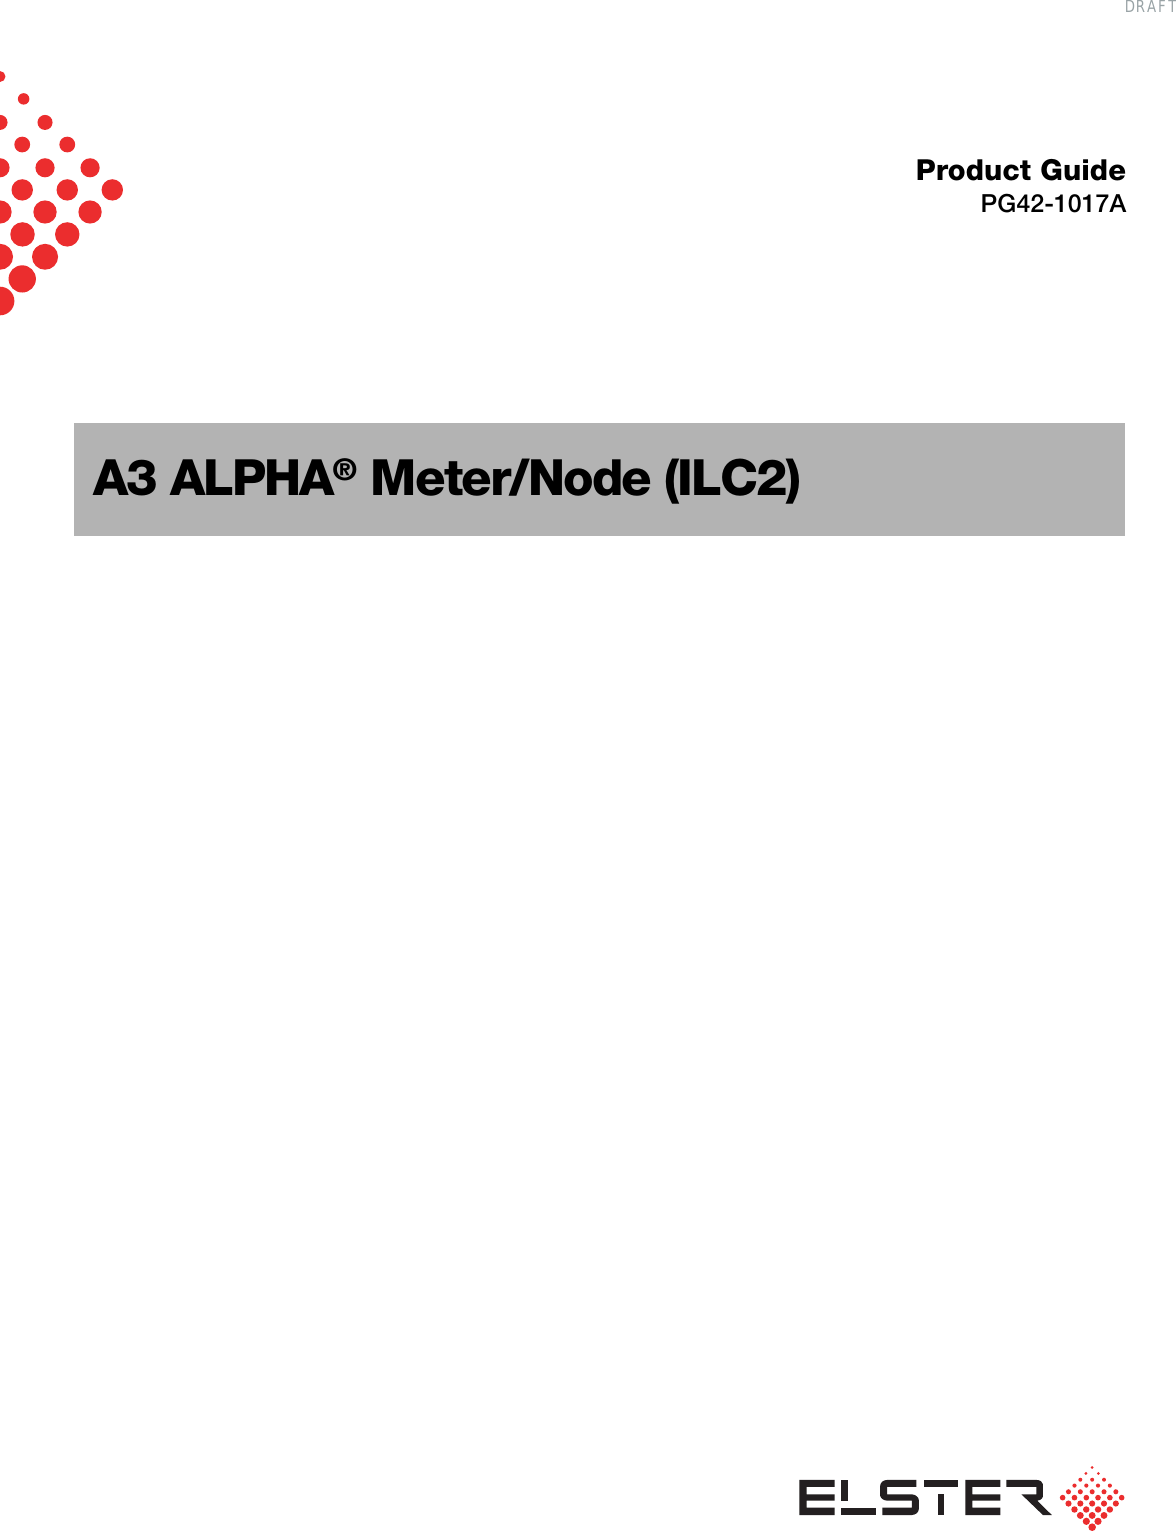 A3 ALPHA® Meter/Node (ILC2)Product GuidePG42-1017ADRAFT